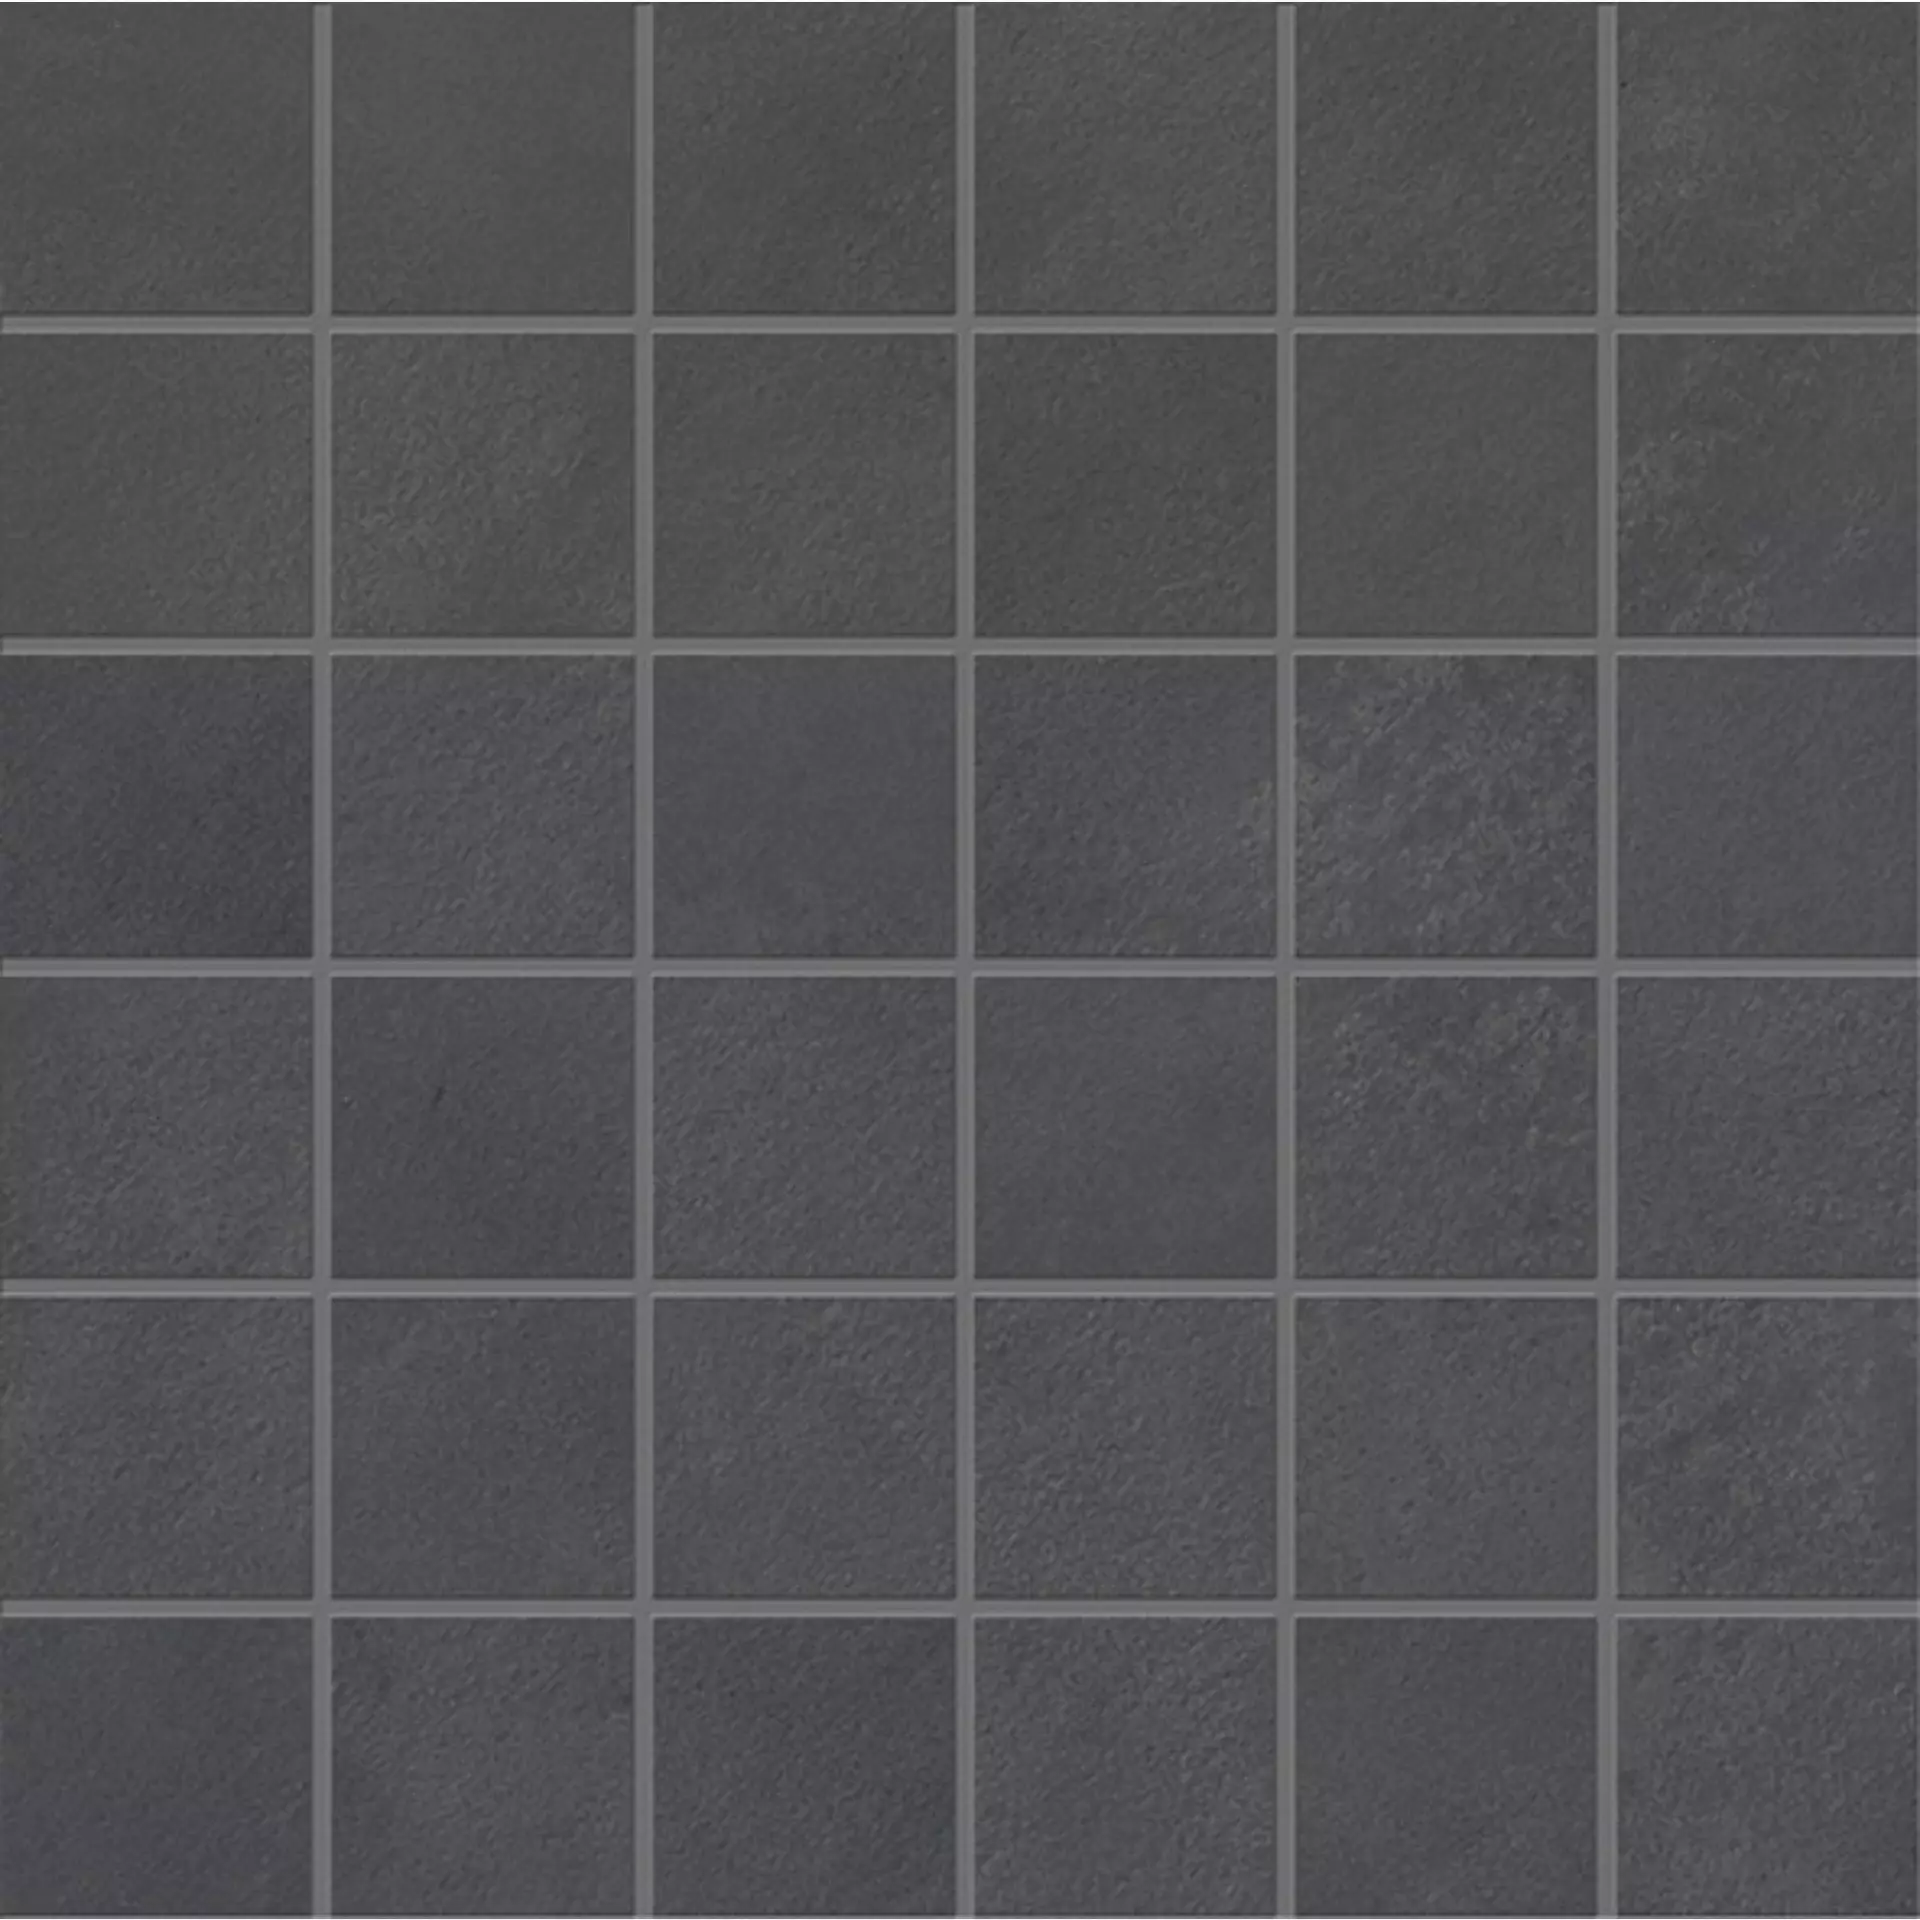 Supergres Colovers Love Black Naturale – Matt Mosaic LKMS 30x30cm rectified 9mm